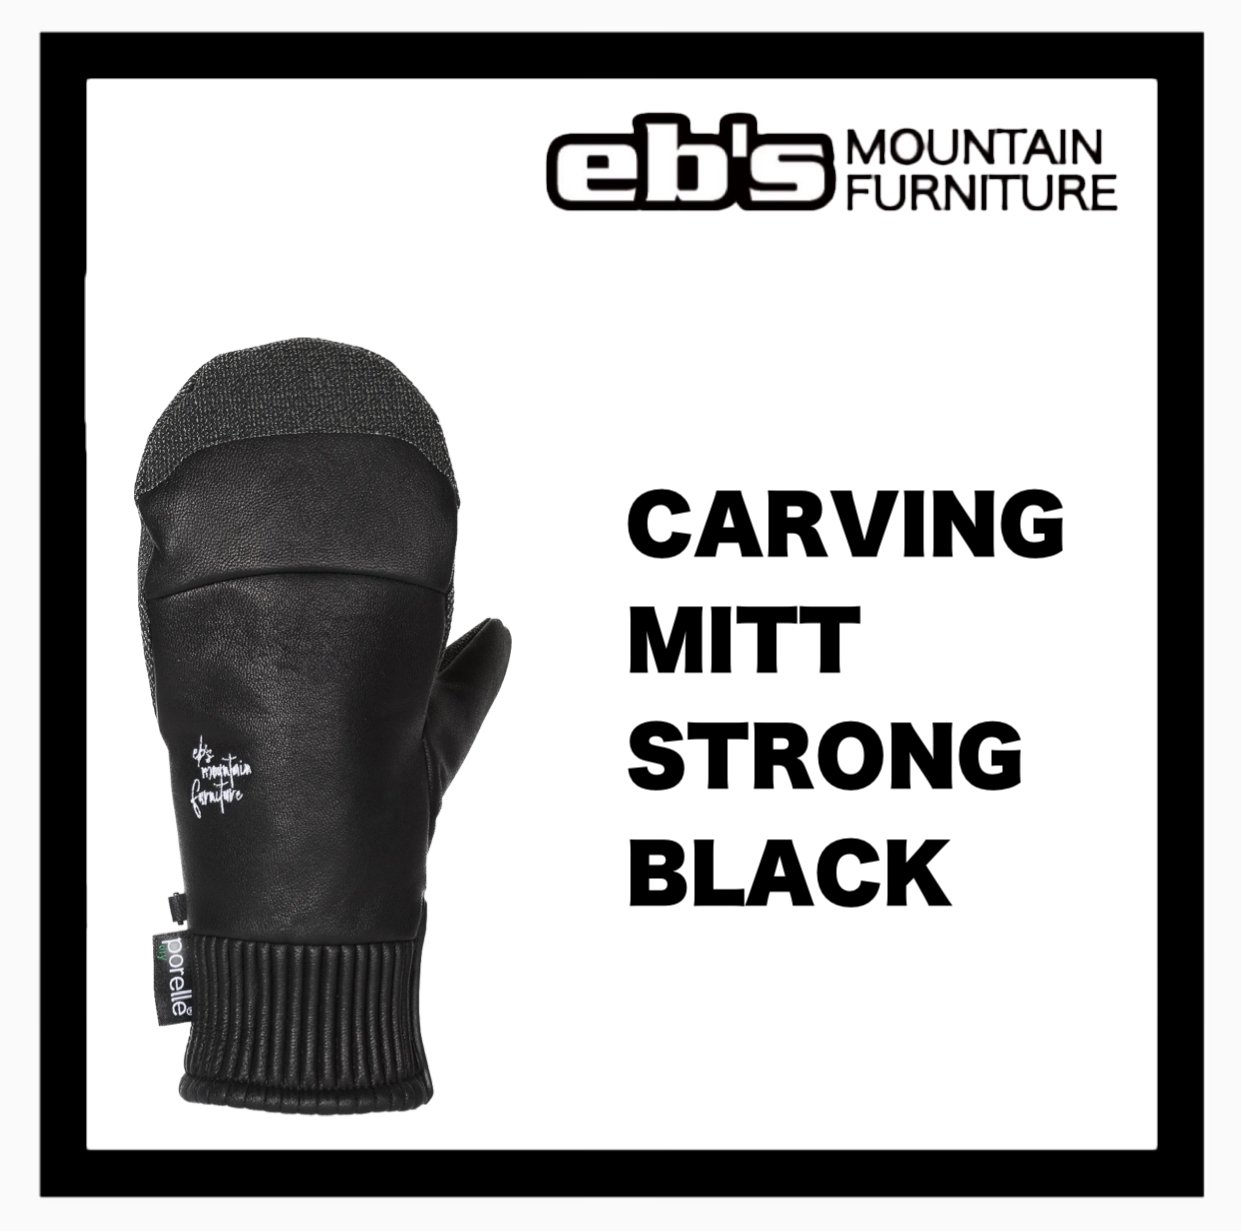 <img class='new_mark_img1' src='https://img.shop-pro.jp/img/new/icons14.gif' style='border:none;display:inline;margin:0px;padding:0px;width:auto;' />eb'sCARVING MITT / STRONG  BLACK